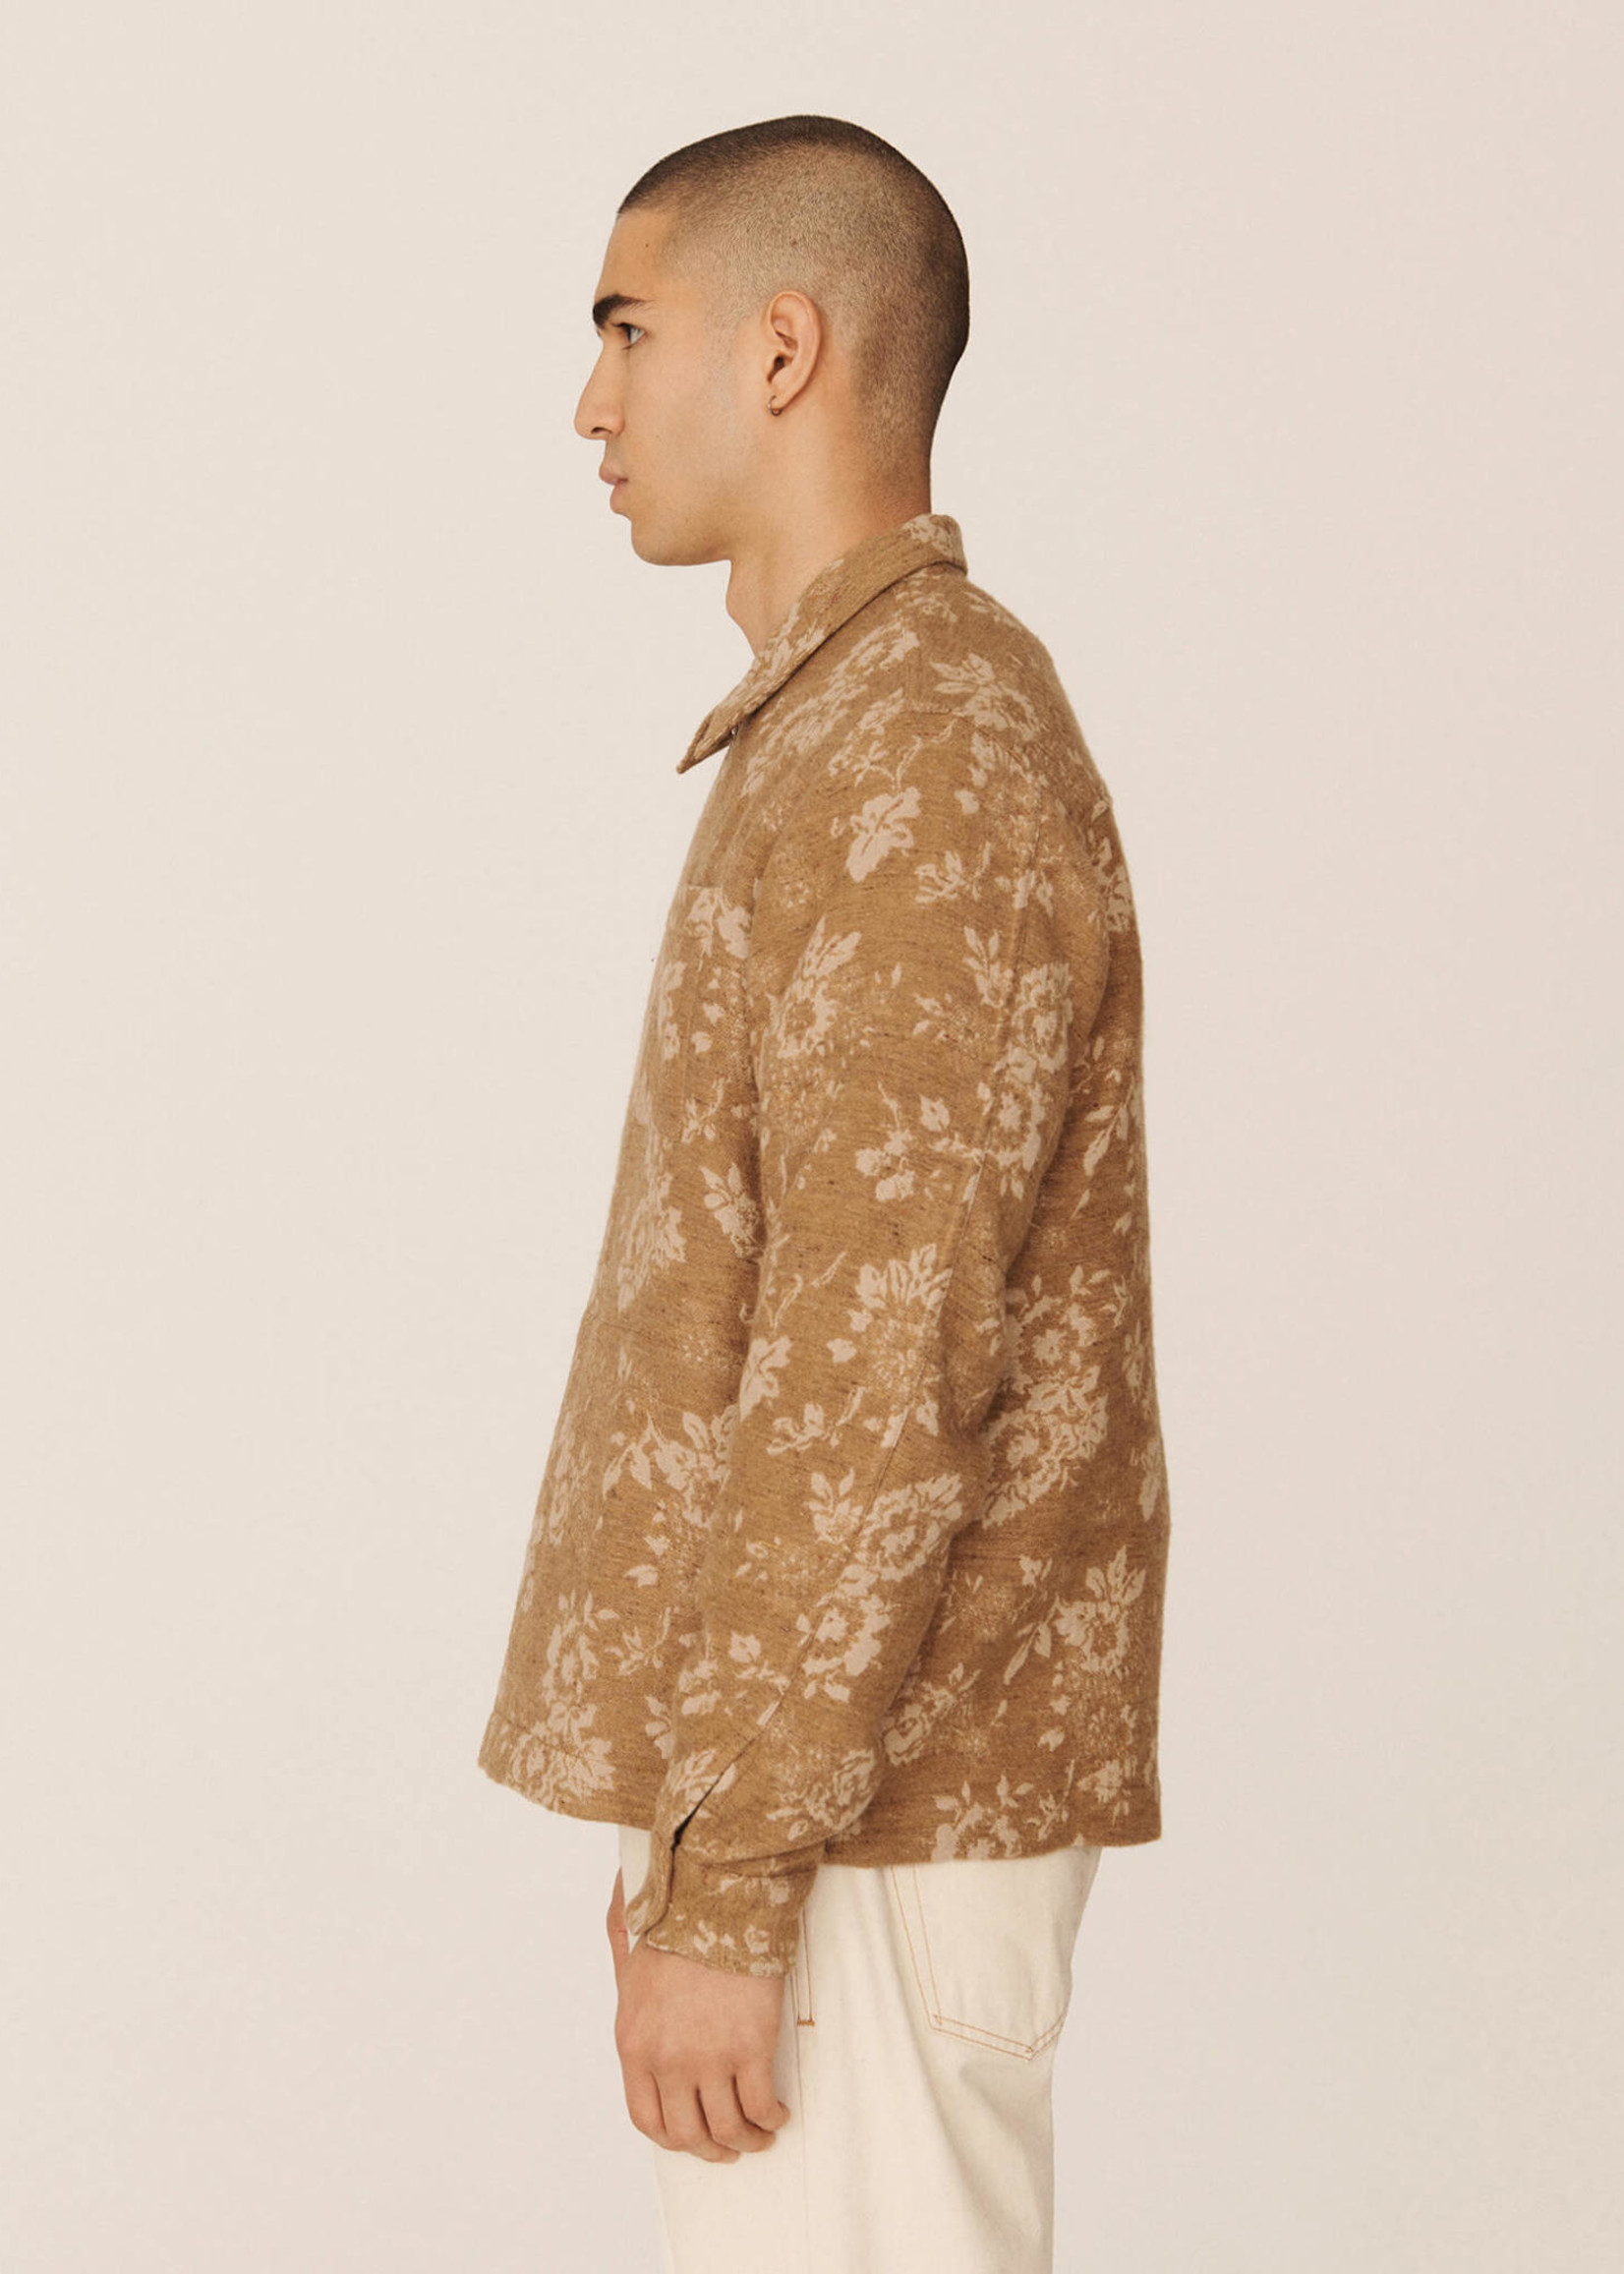 YMC Bowie Floral Jacquard Zip Up Overshirt in Tan